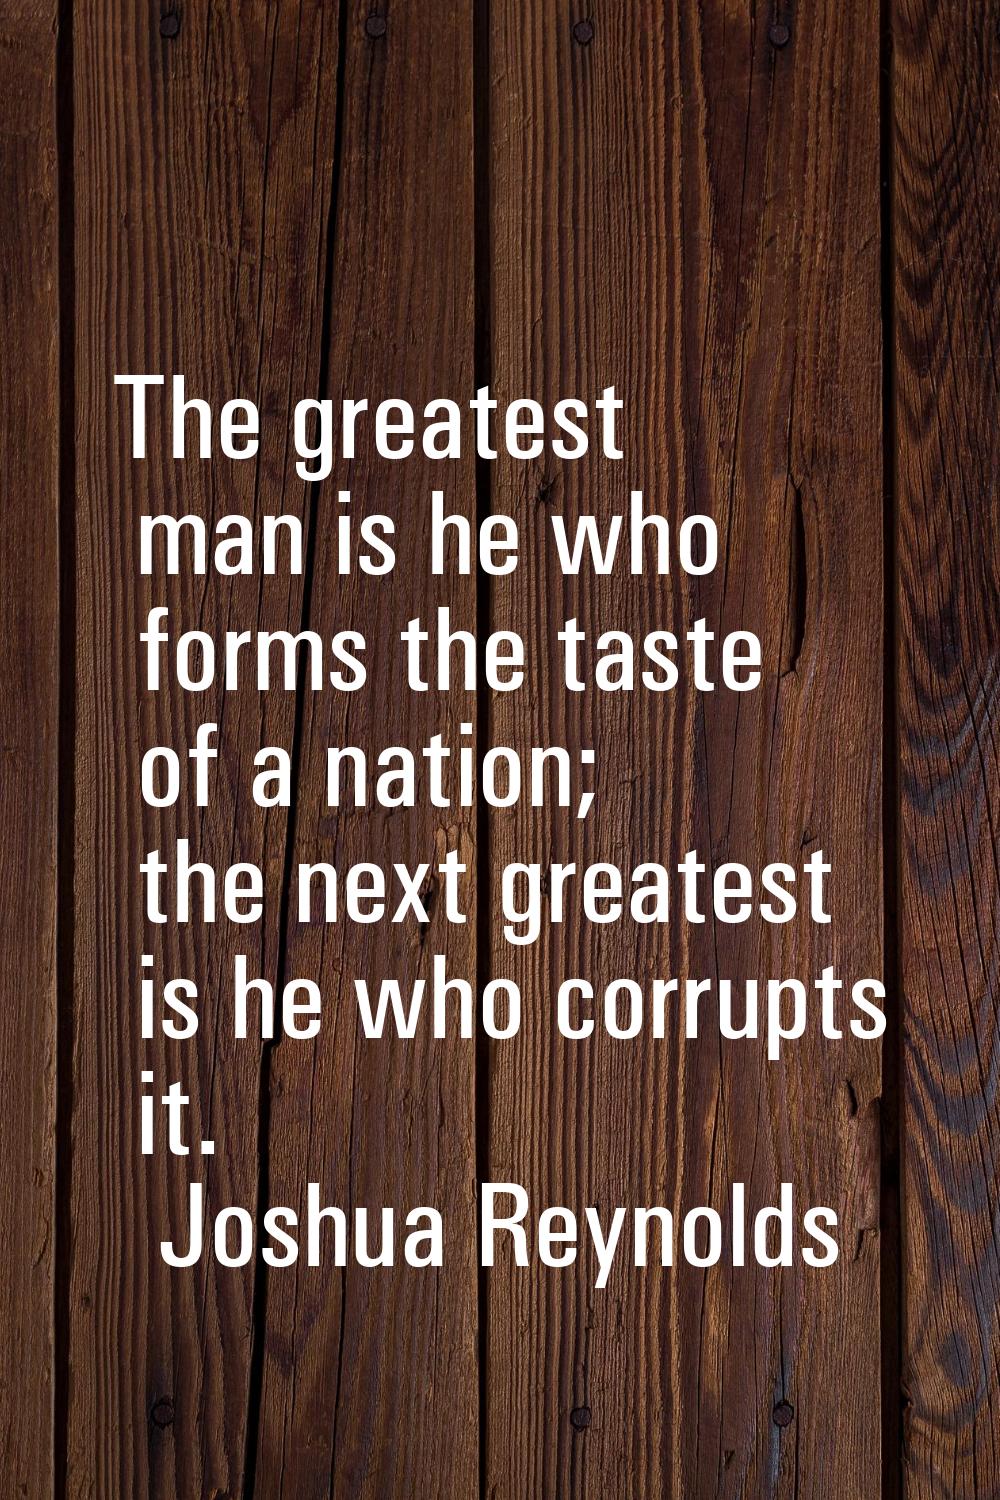 The greatest man is he who forms the taste of a nation; the next greatest is he who corrupts it.